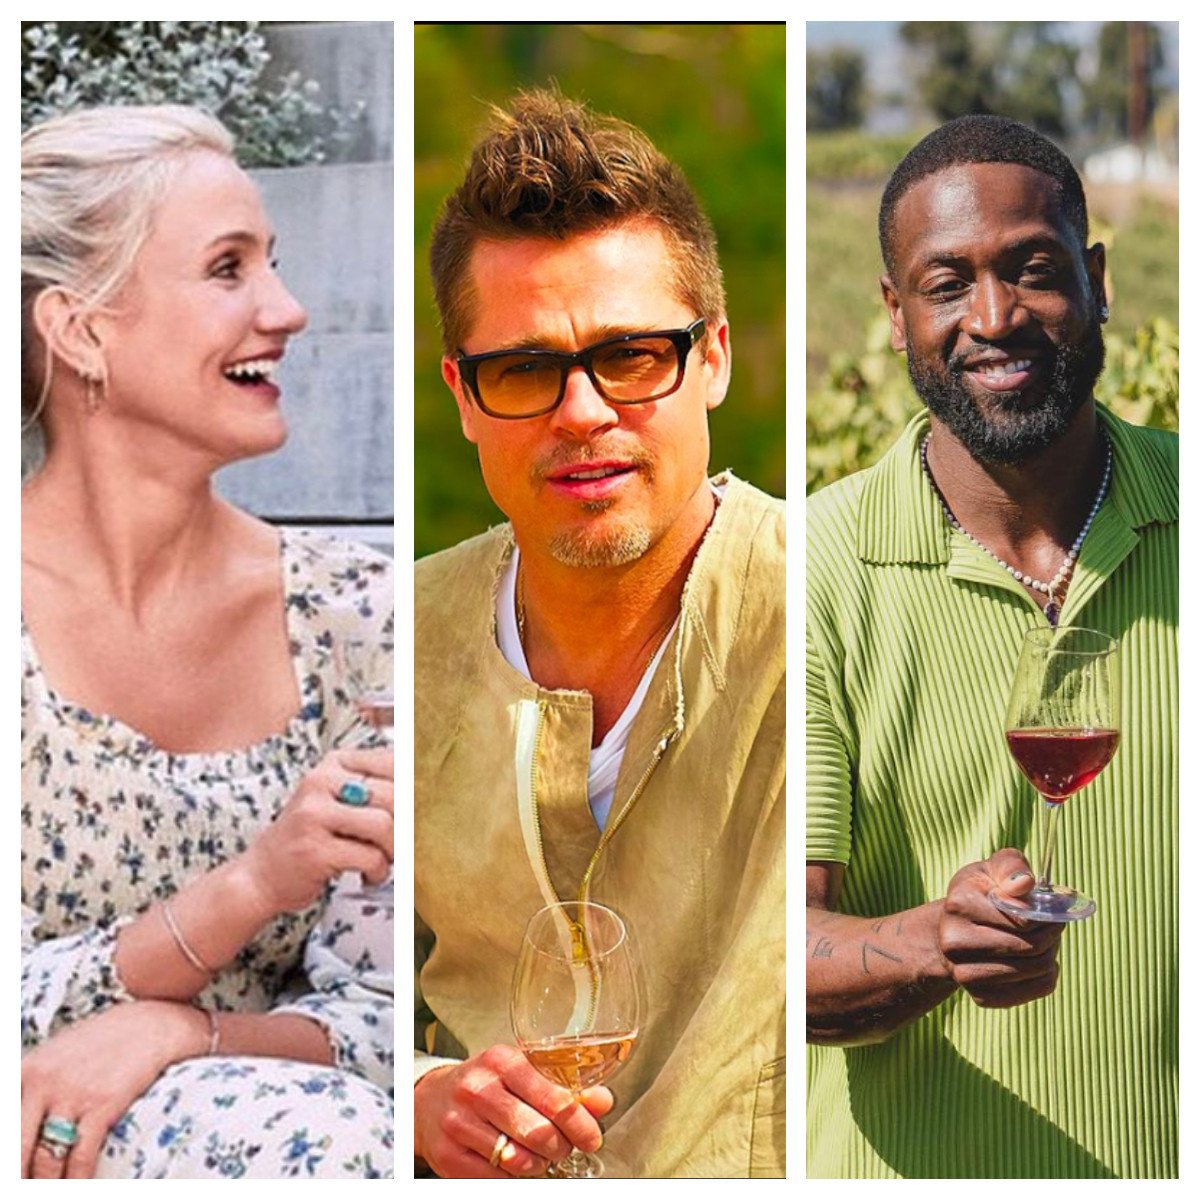 Cameron Diaz, Brad Pitt and Dwyane Wade all own wineries or wine brands. Photos: Instagram